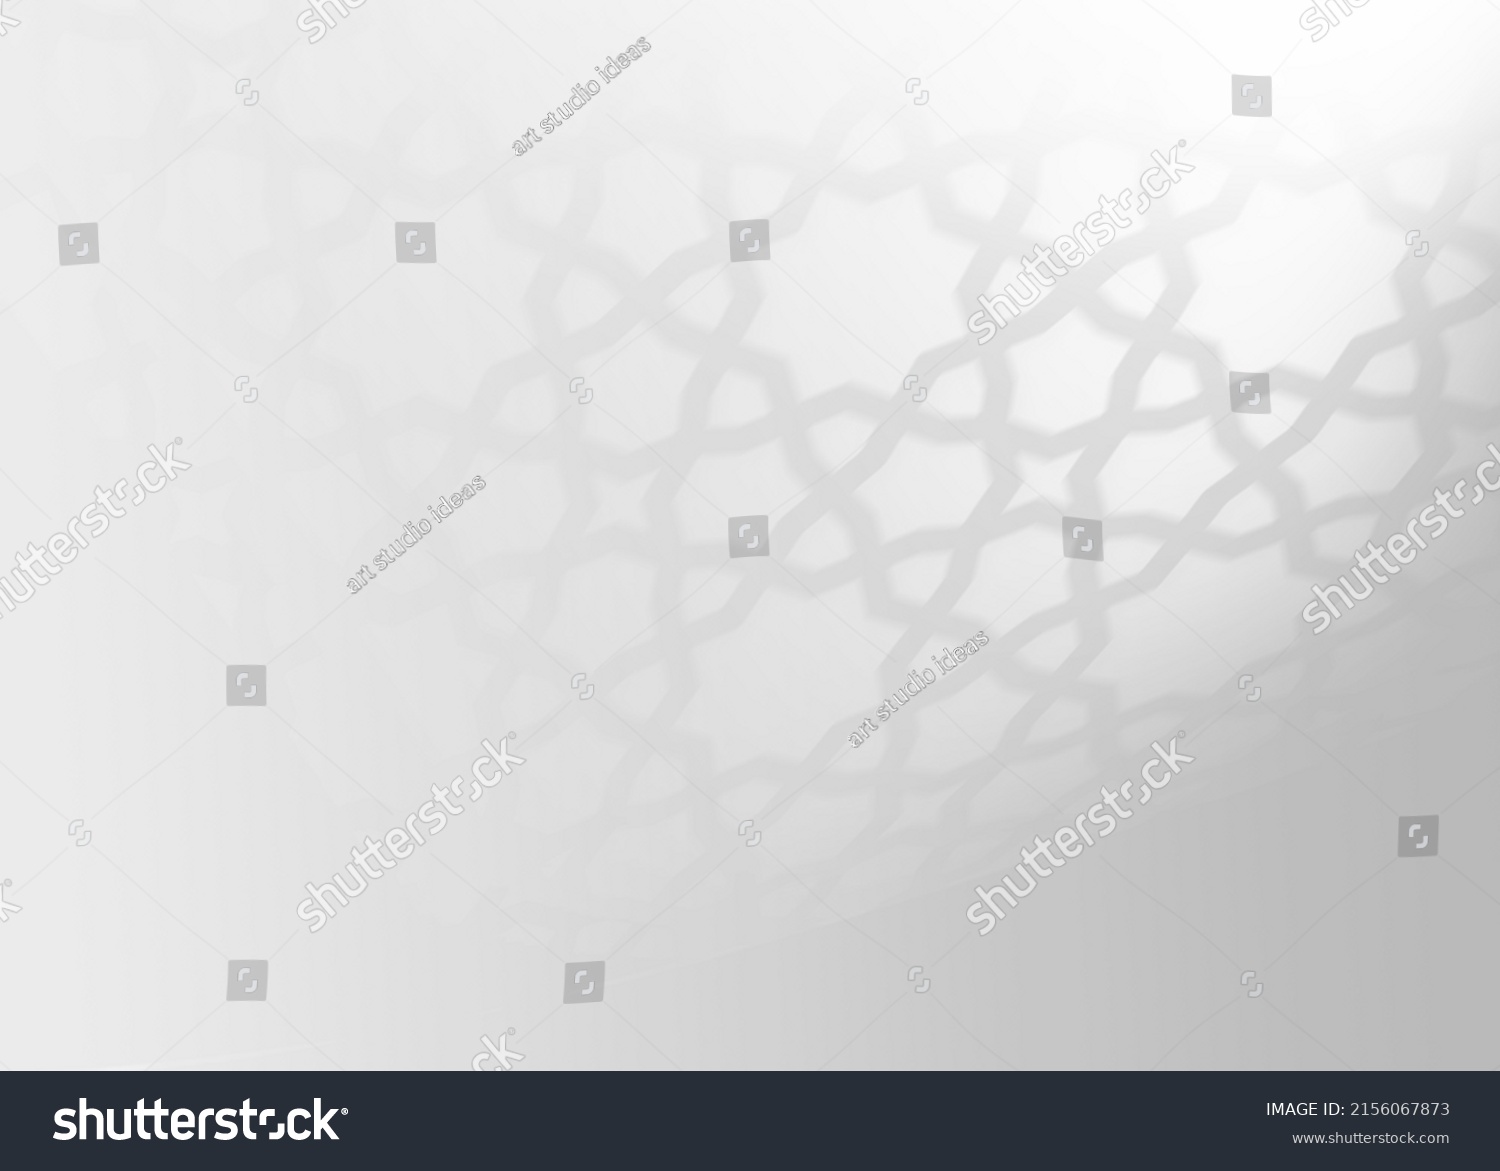 Arabesque shadow, you can use it as overlay layer on any photo.Abstract background  #2156067873